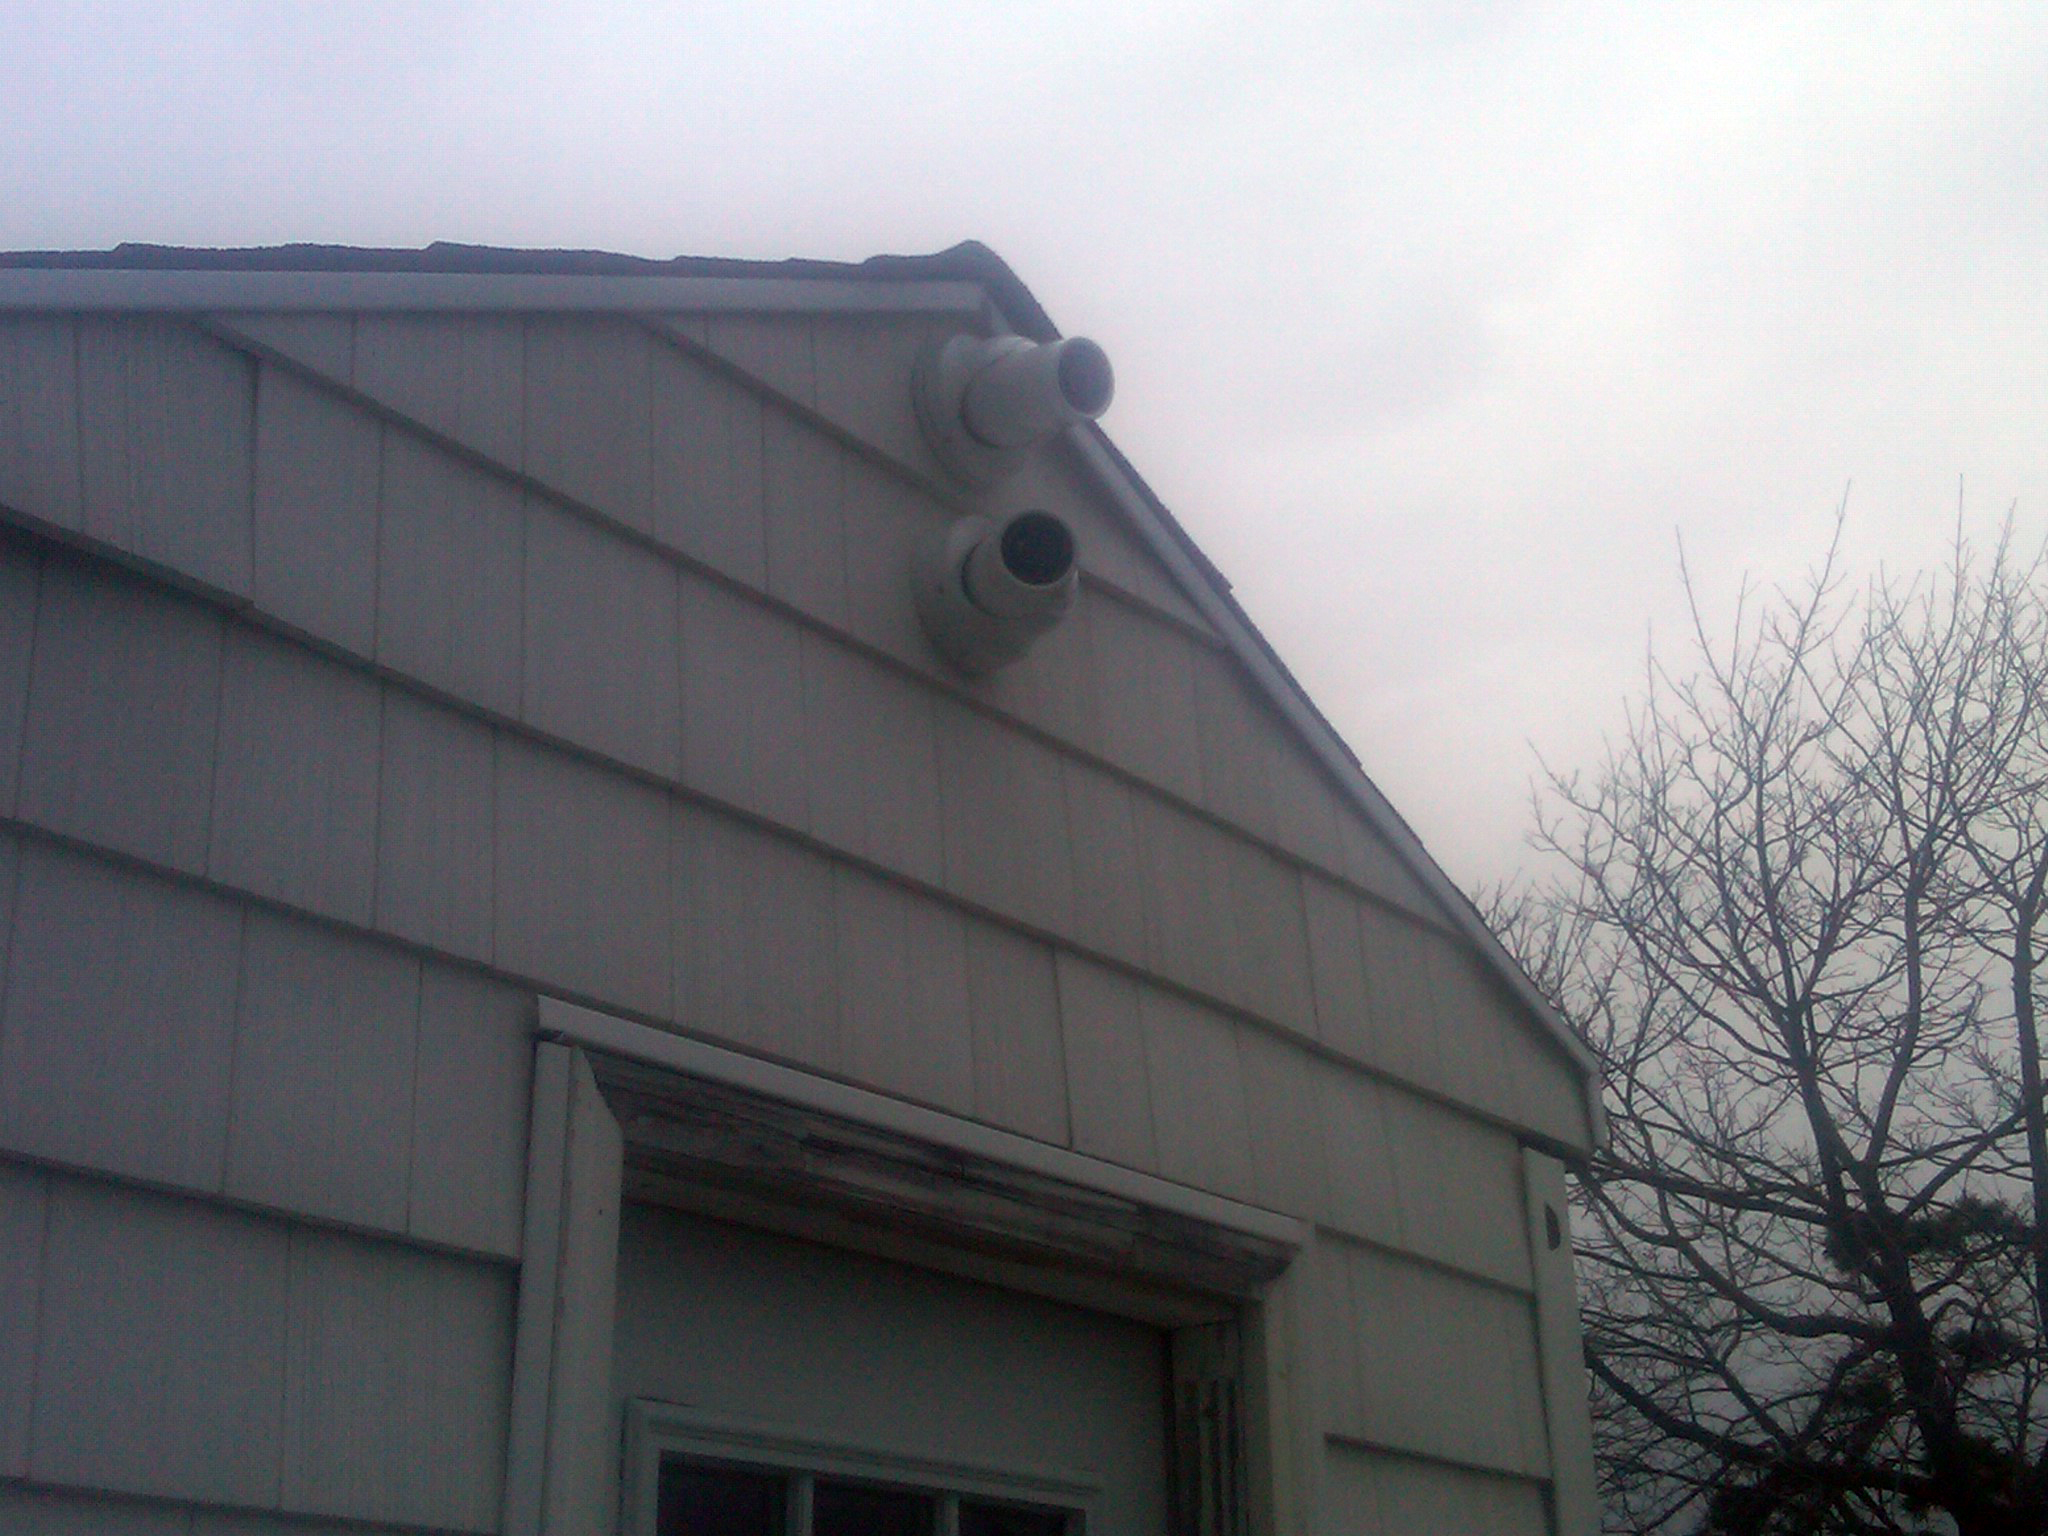 Security cameras are seen at Oak Beach 